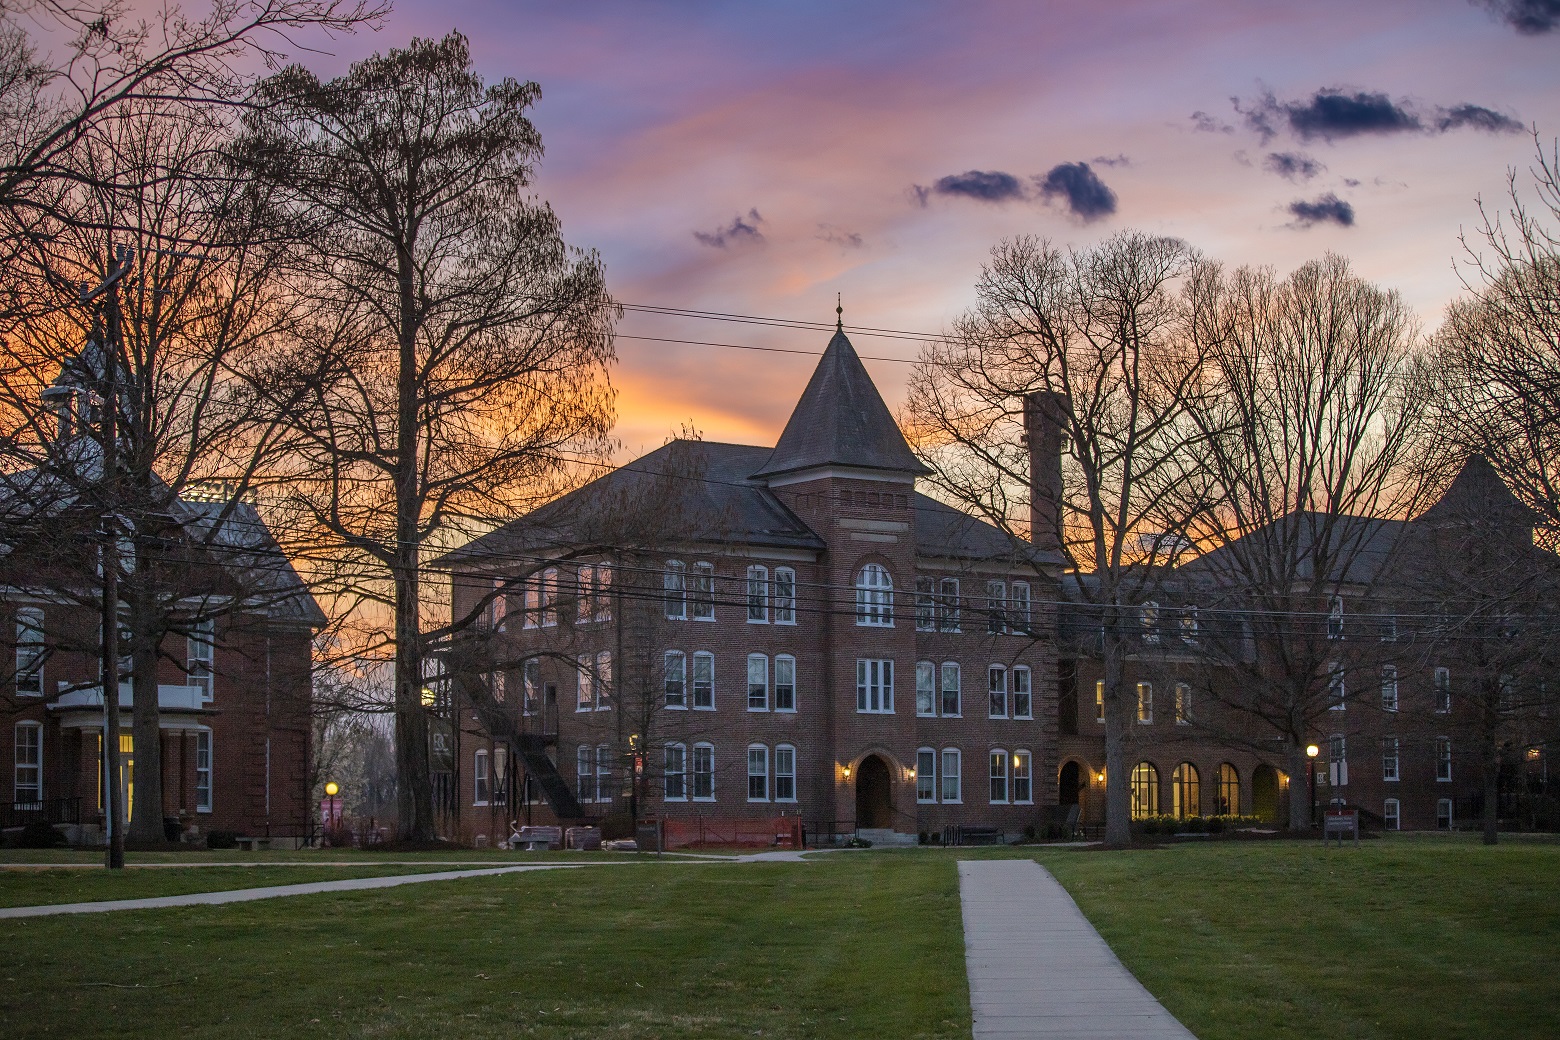 Flory Hall pictured during a purple-ish pink and orange sunset